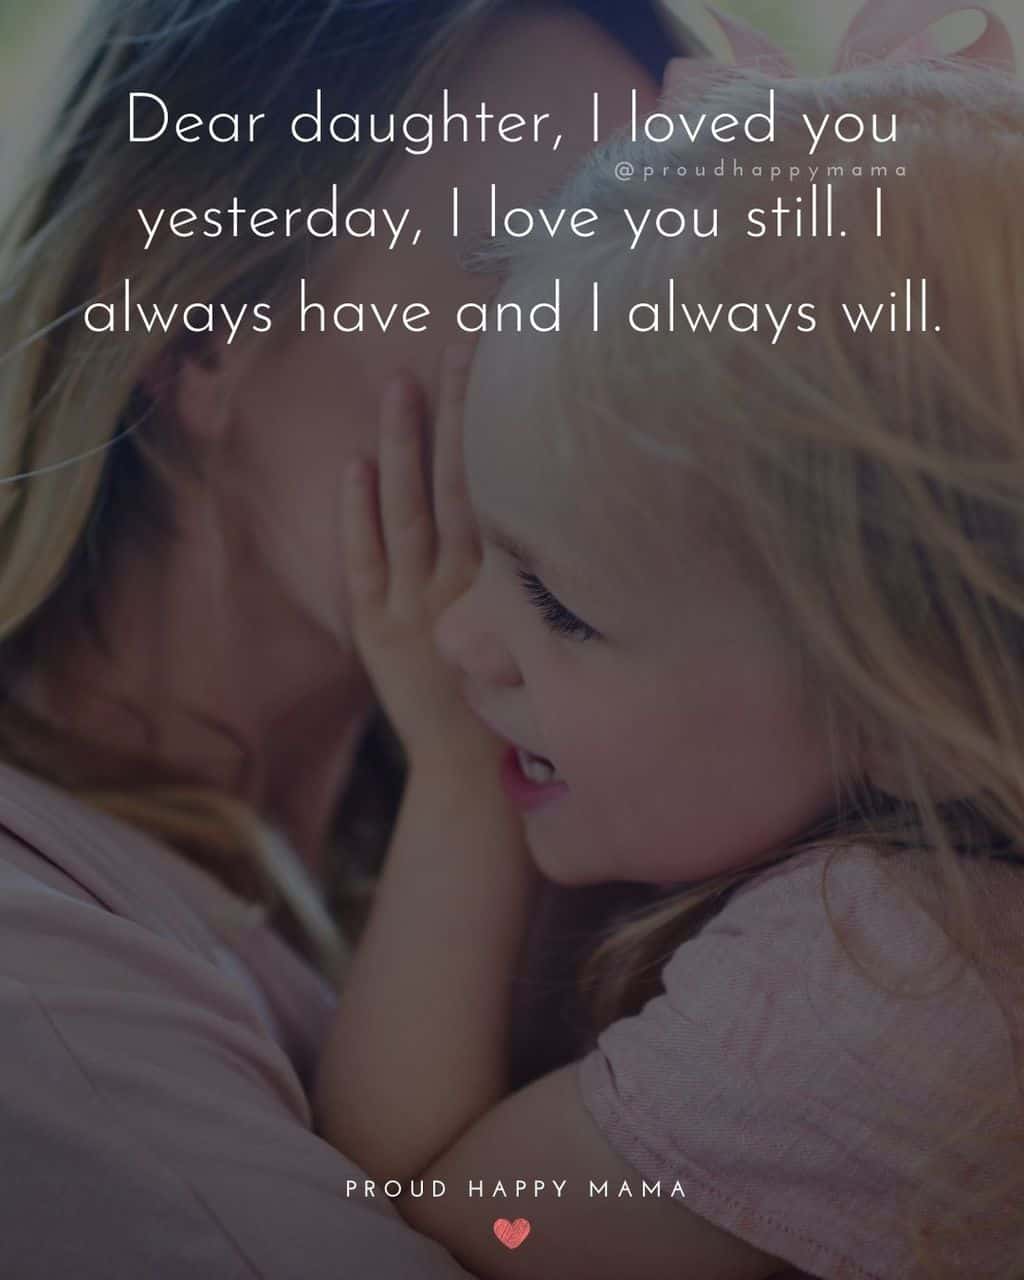 to.my daughter quotes - ‘Dear daughter, I loved you yesterday, I love you still. I always have and I always will.’